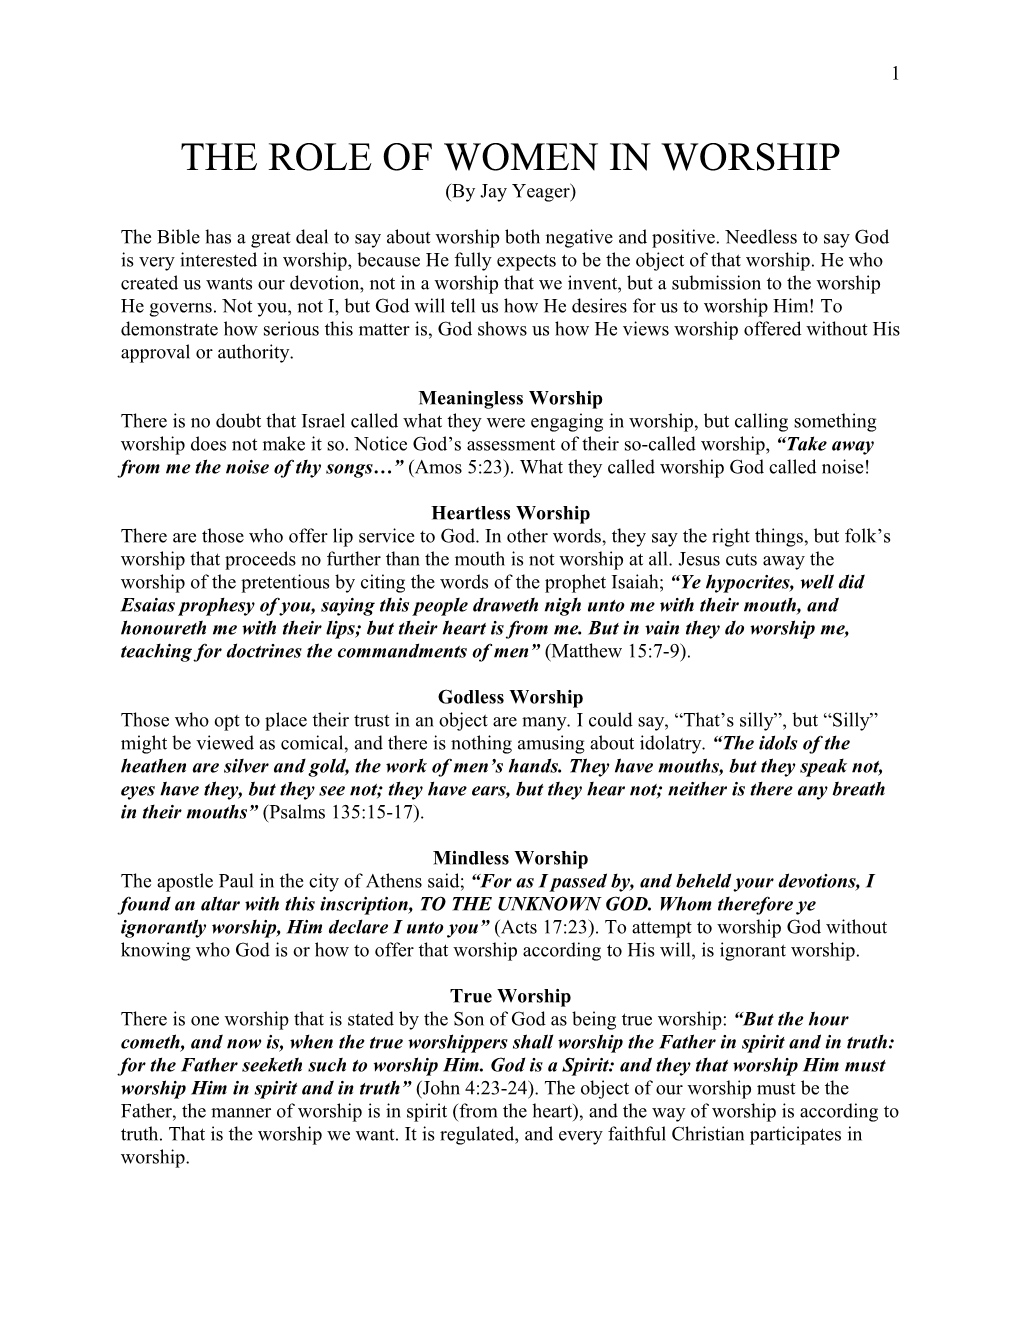 The Role of Women in Worship